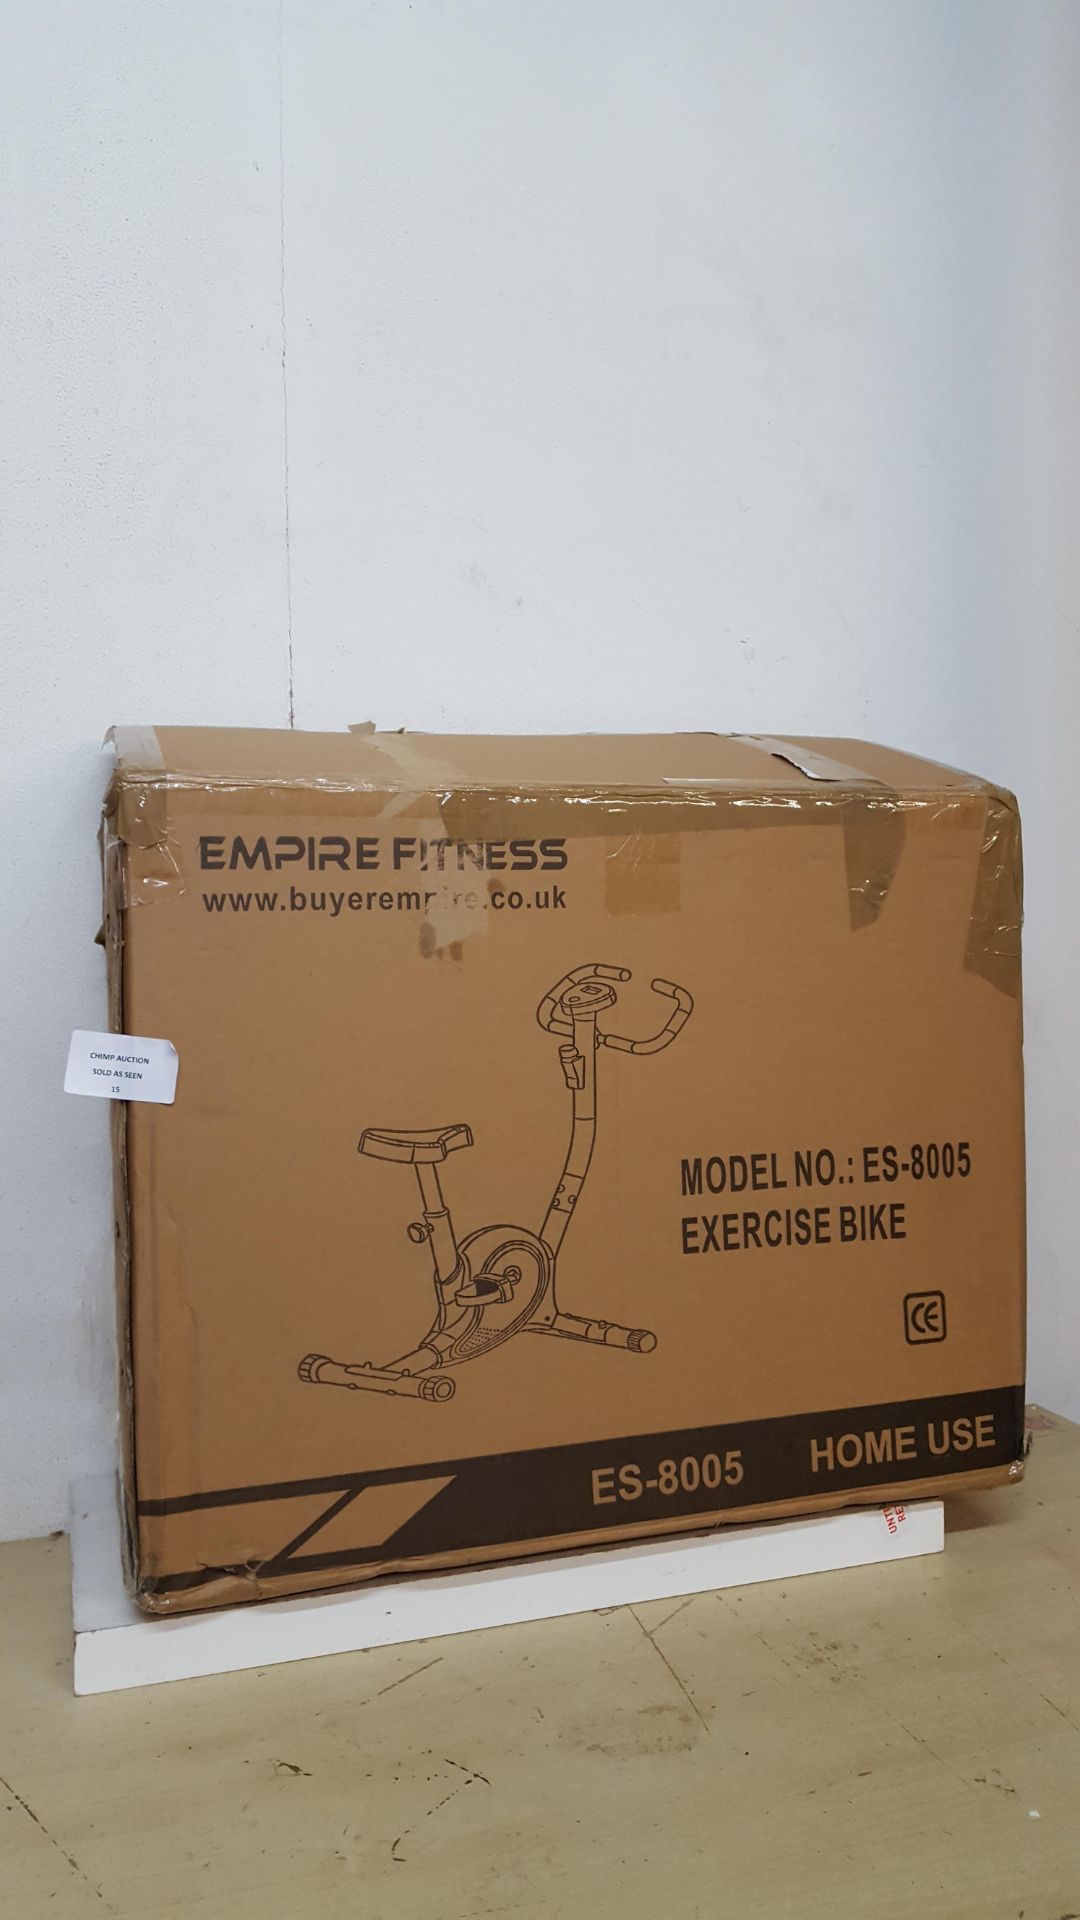 BRAND NEW EMPIRE FITNESS ES-8005 EXERCISE BIKE / HOME USE RRP £139.99/